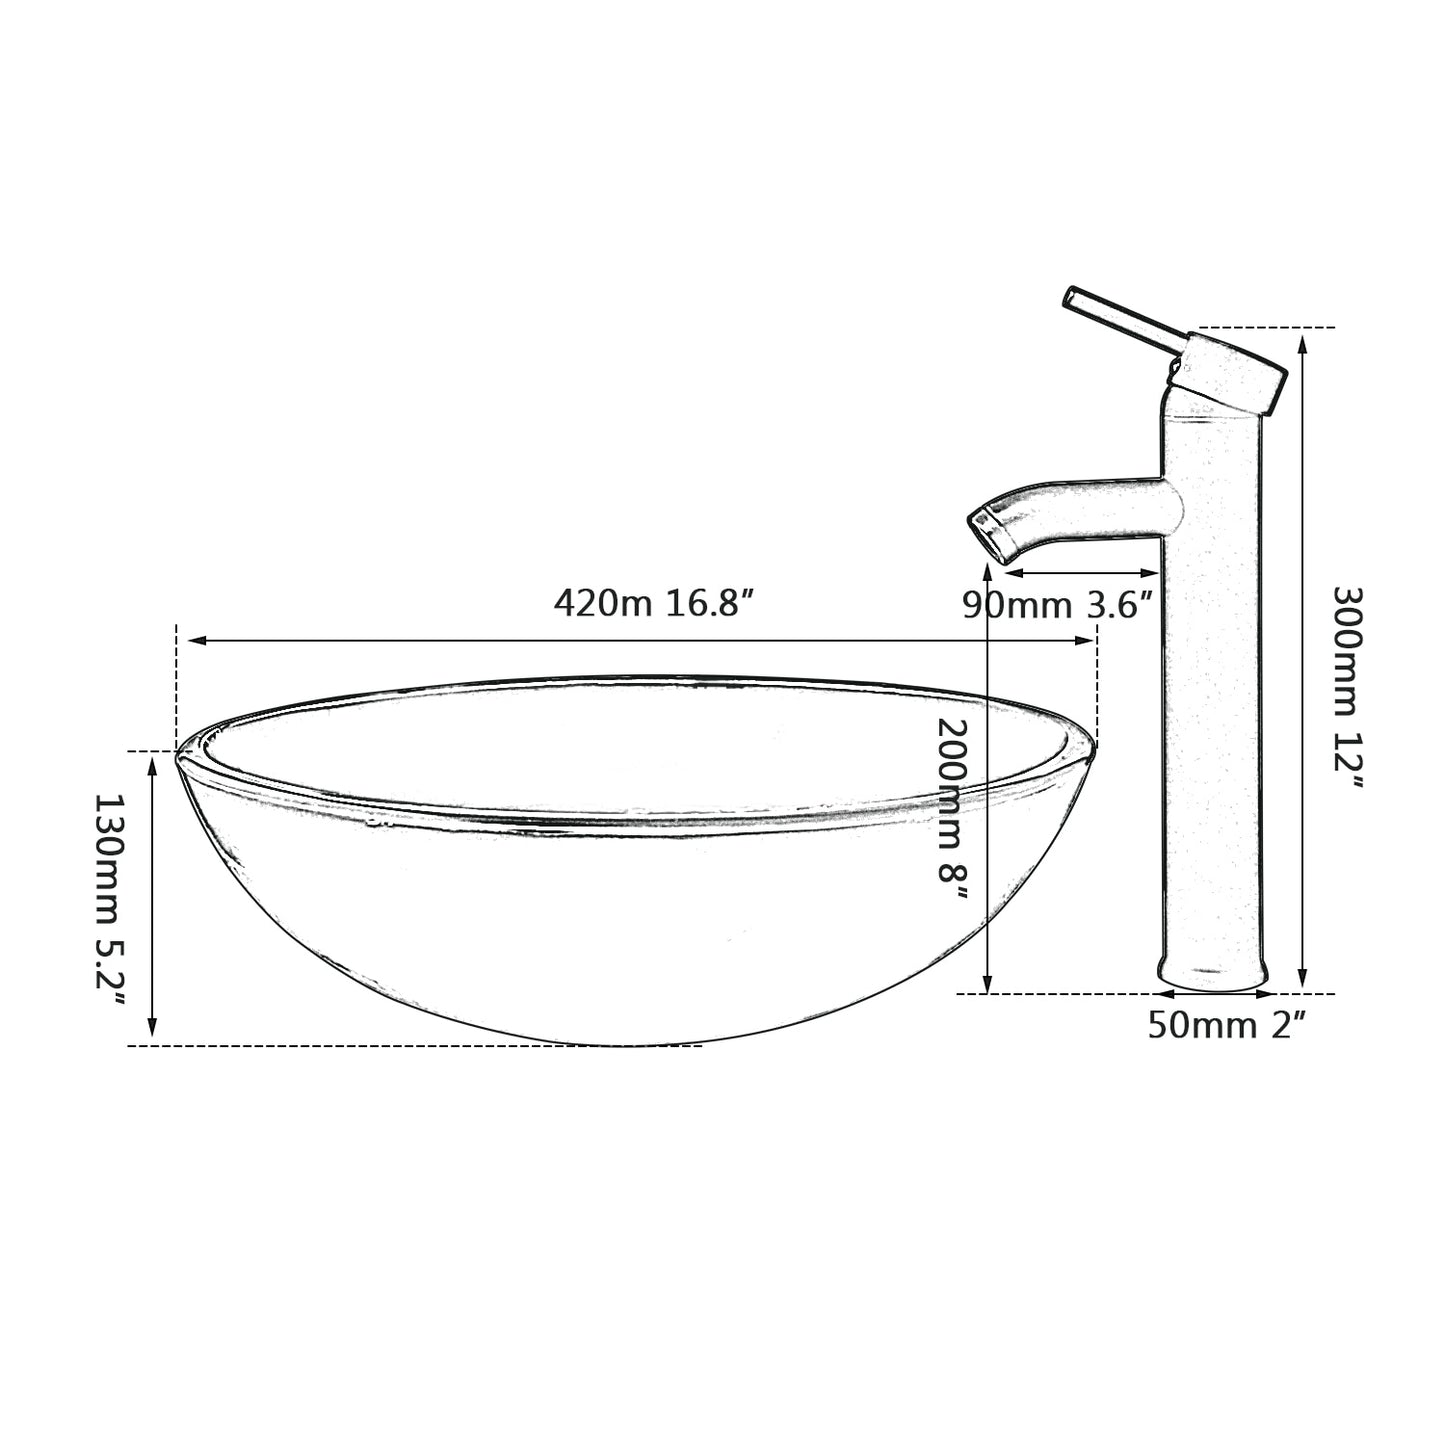 Brown Glass Vessel Sink Bowl with Matching Faucet Set